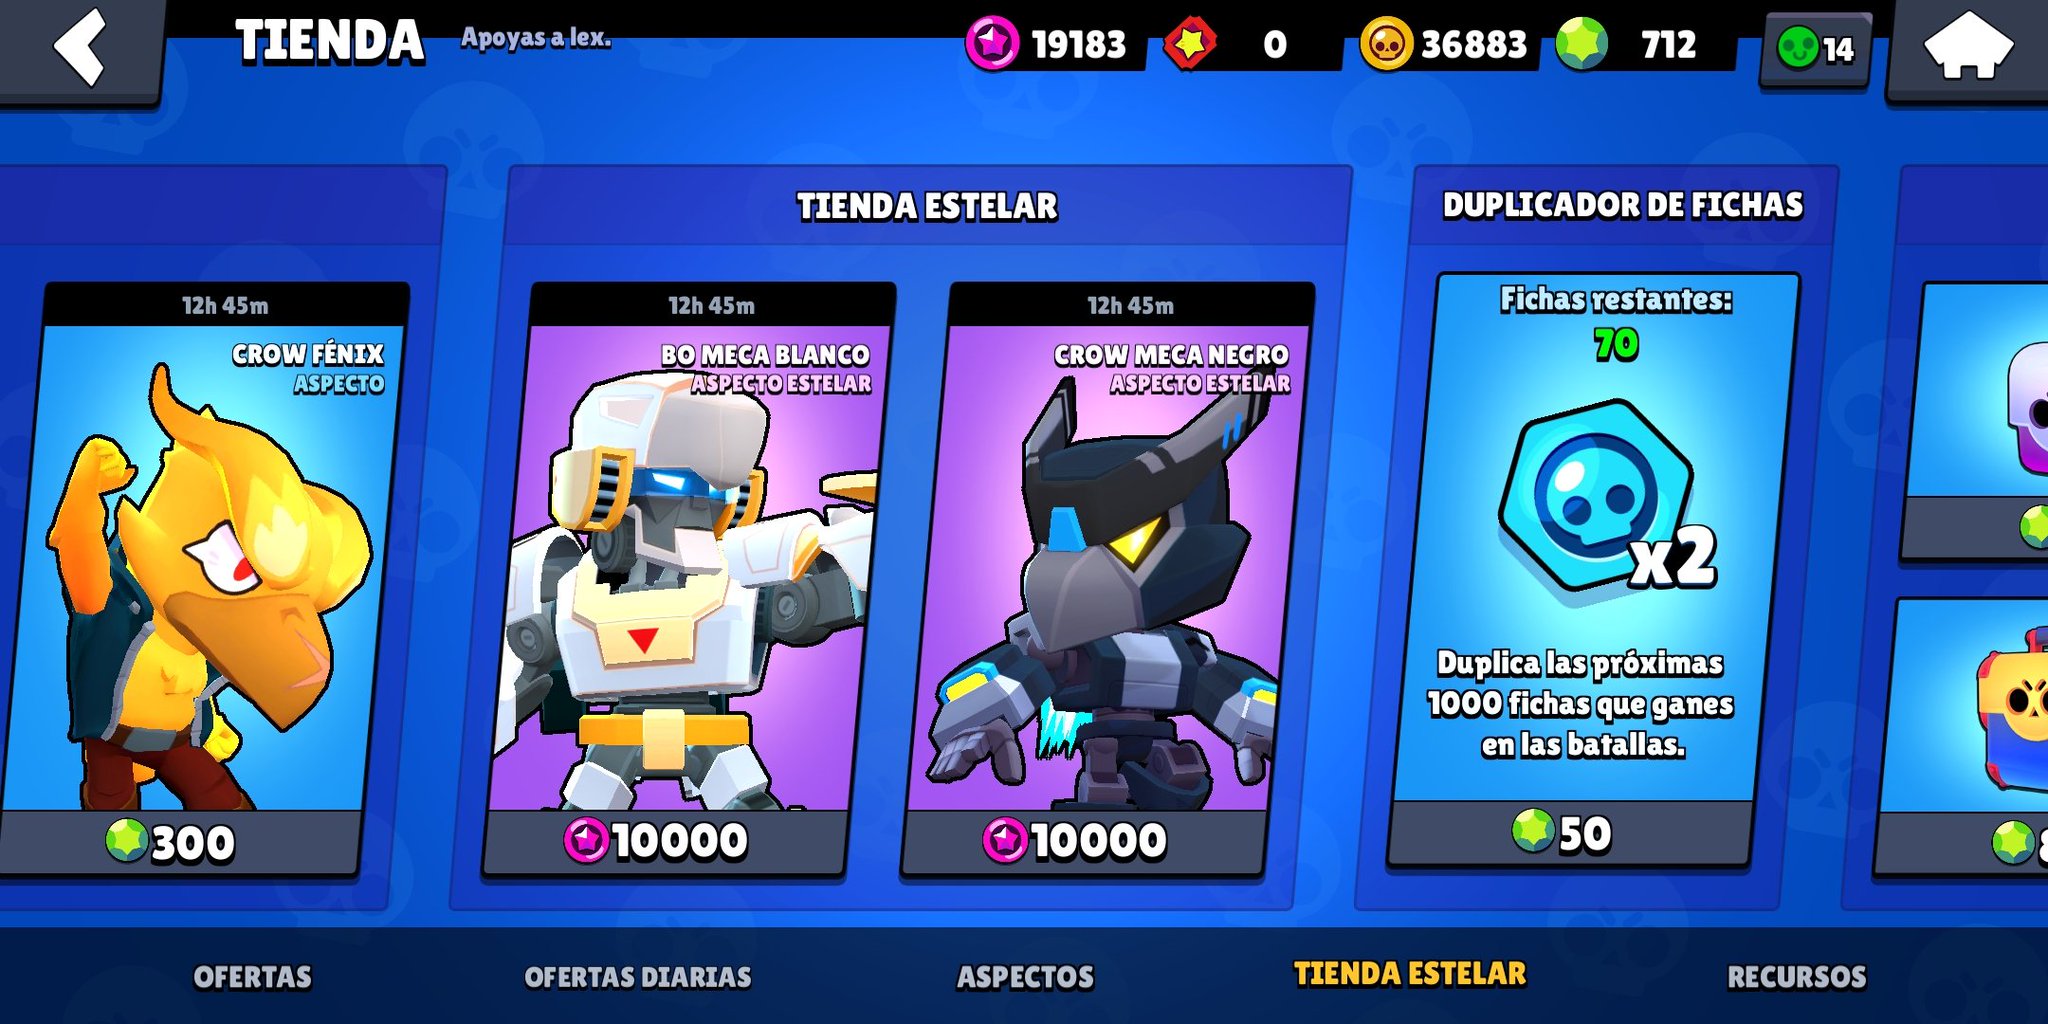 Beng11 Brawl Stars On Twitter Should I Buy Nightmechacrow Or Save My Star Points And Buy Goldmechacrow In The Future Brawlstars Crow - krowl robot brawl stars